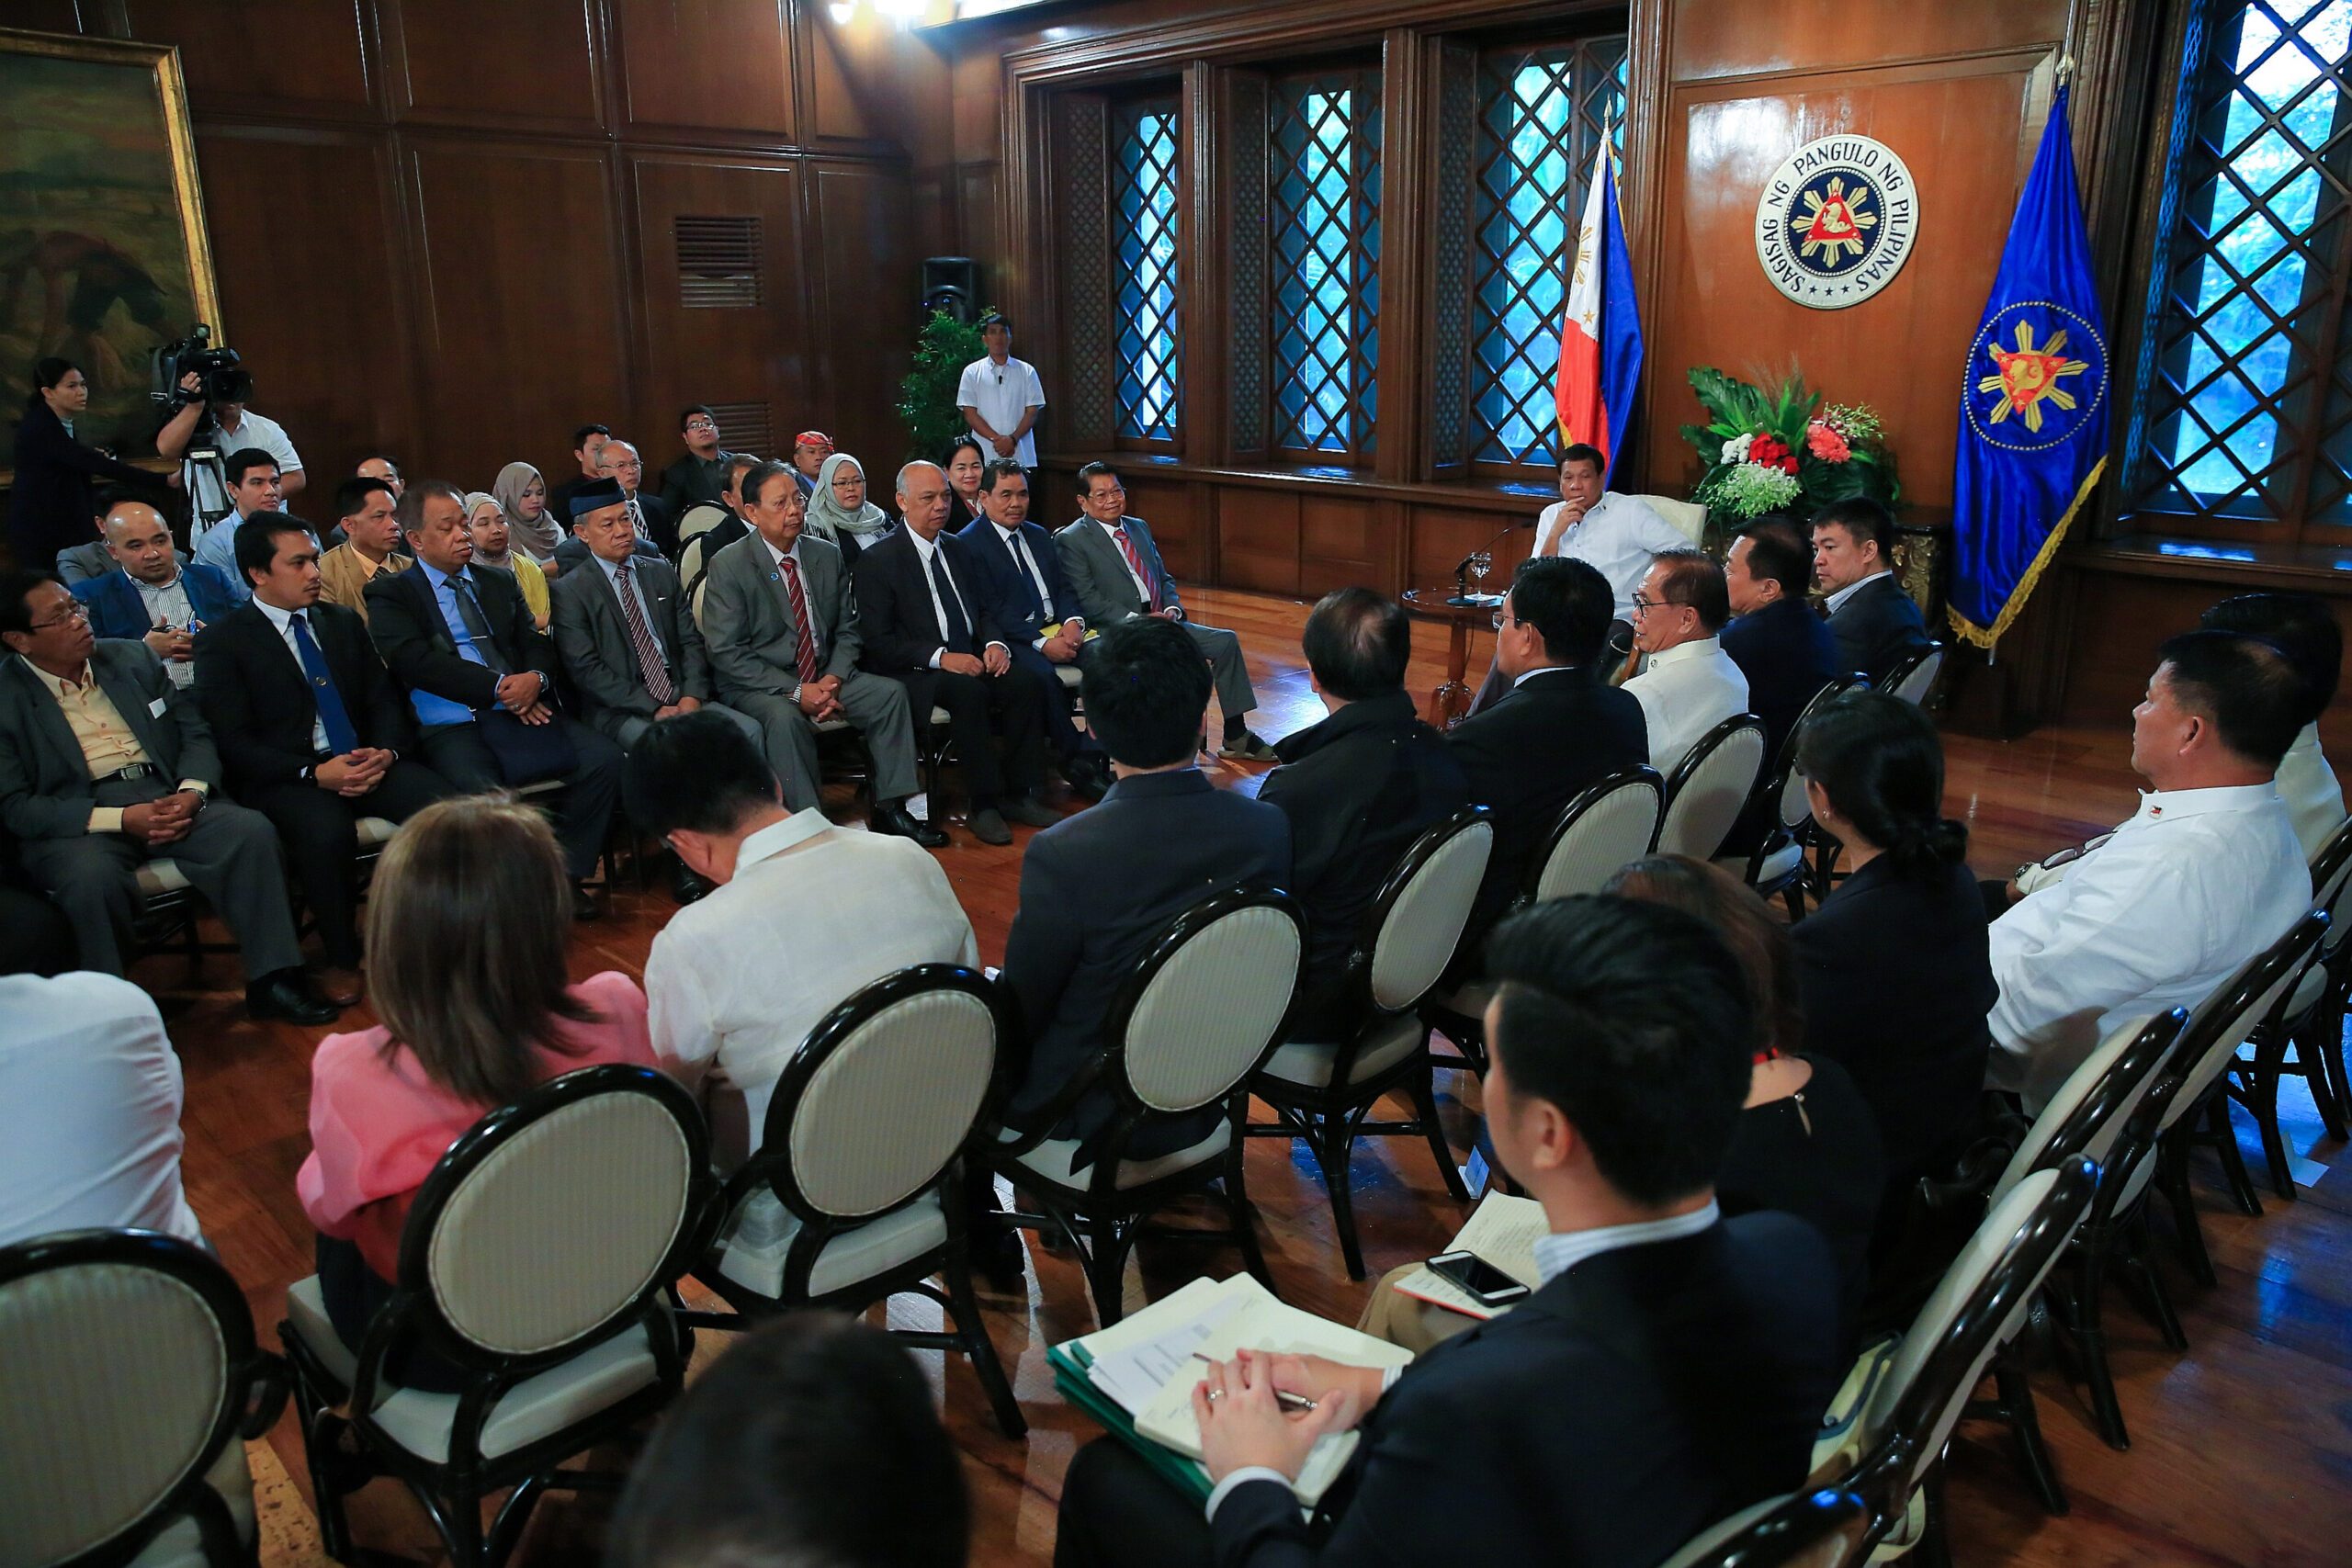 Proposed BBL under Duterte is constitutional – transition commission